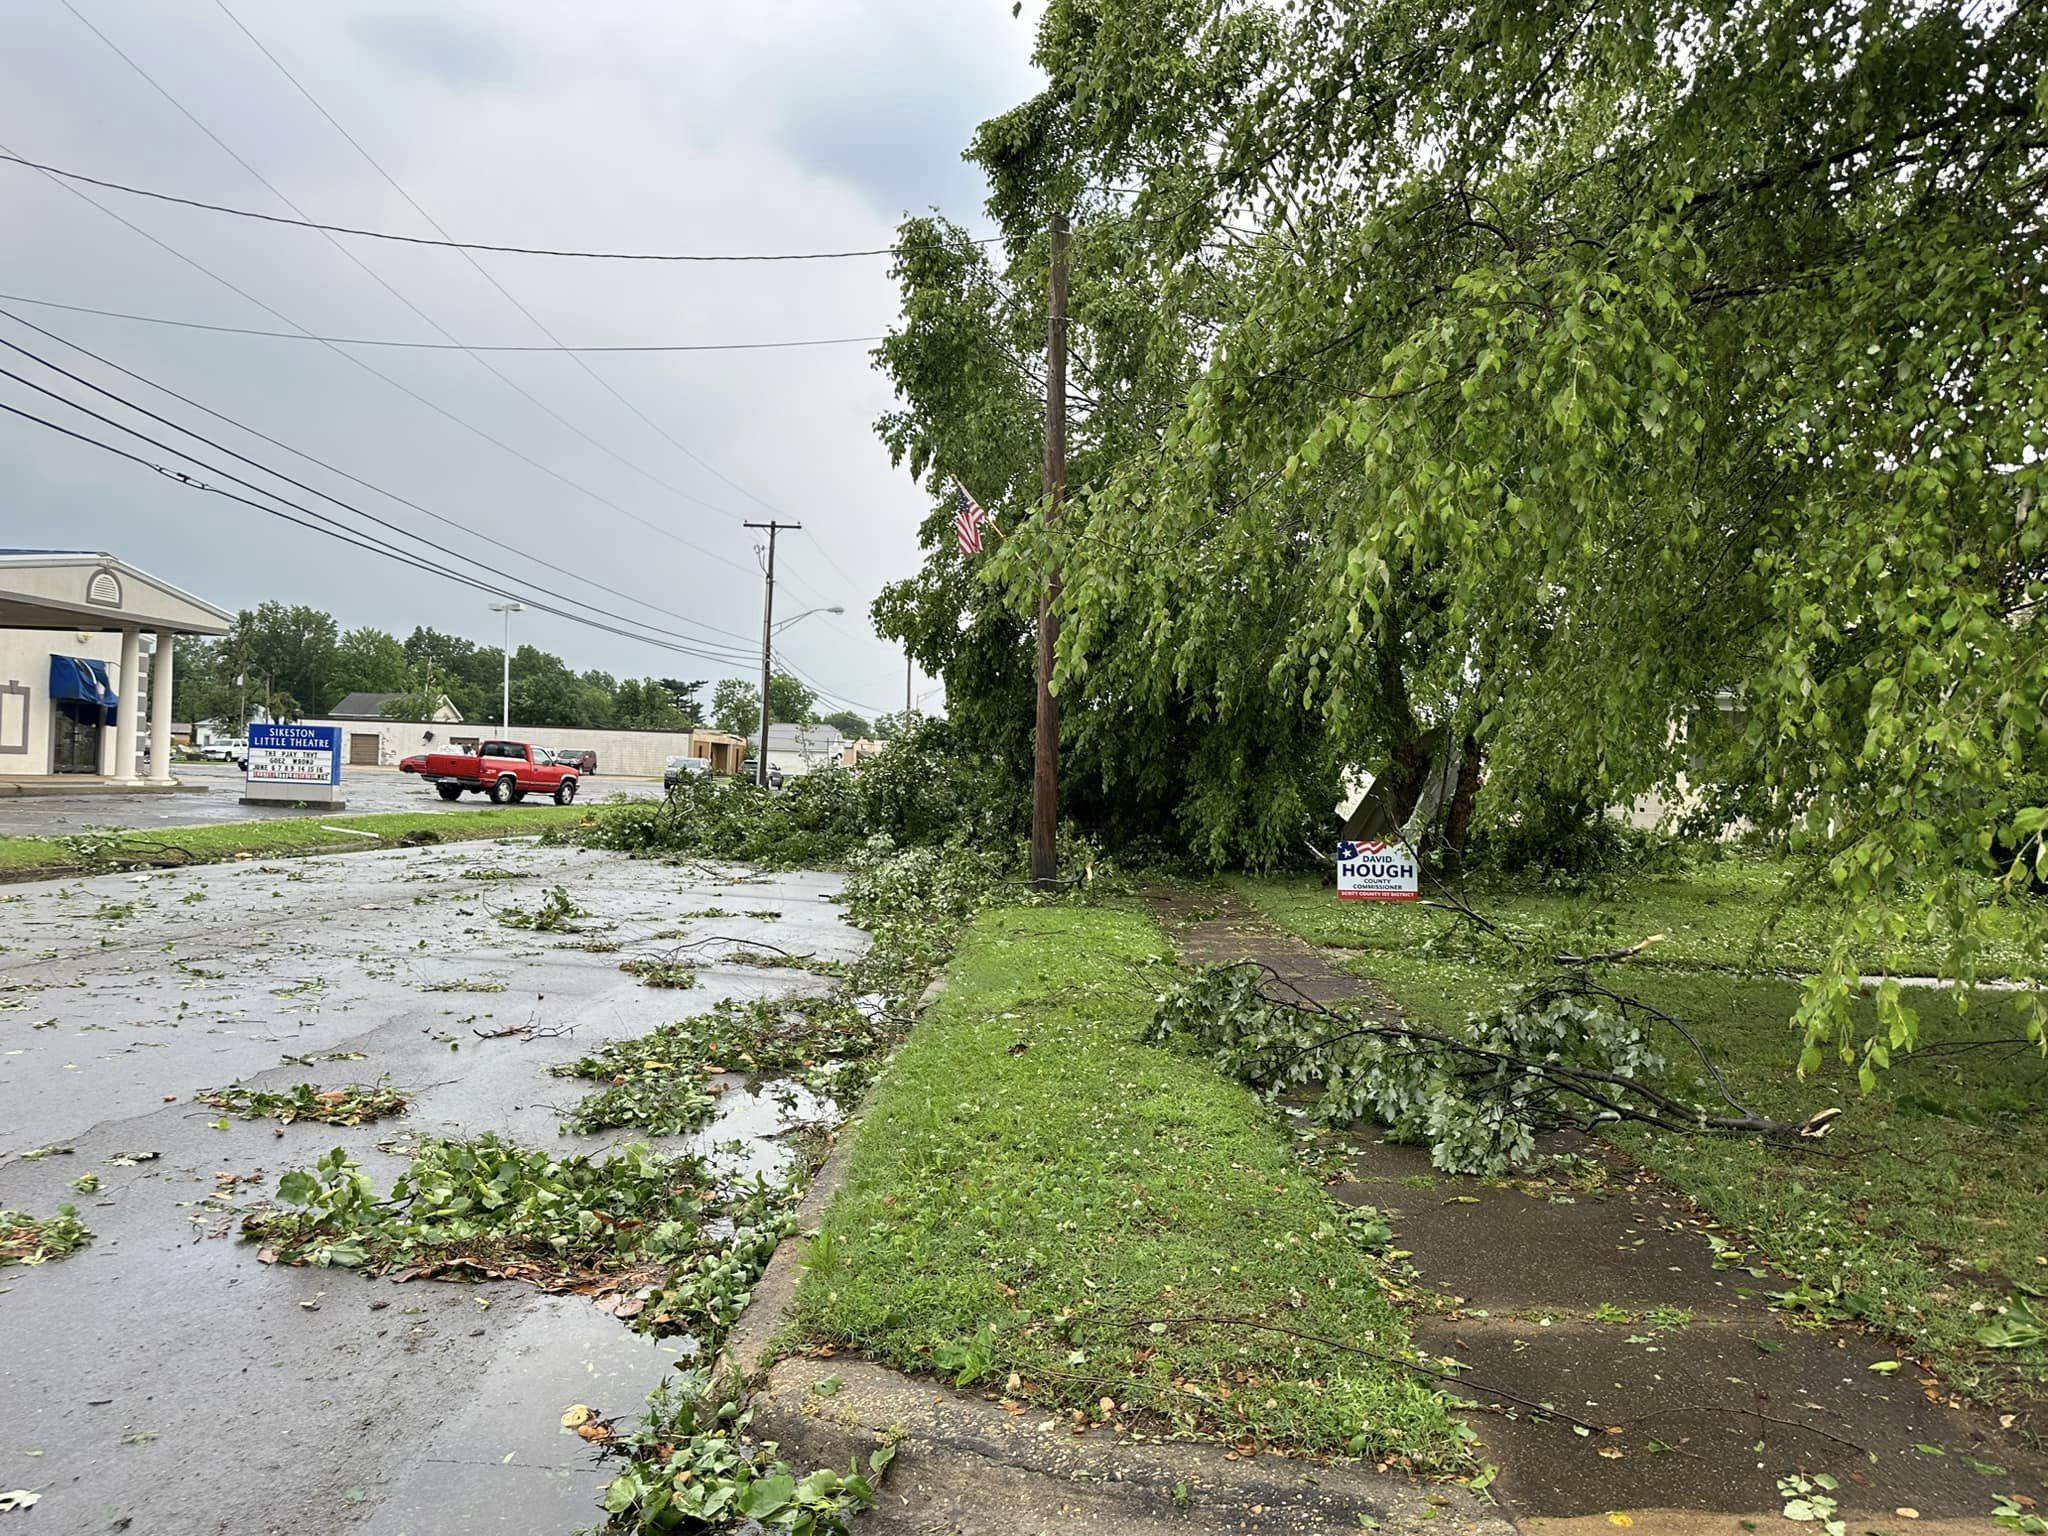 Sikeston under curfew due to the storms - KBSI Fox 23 Cape Girardeau News | Paducah News